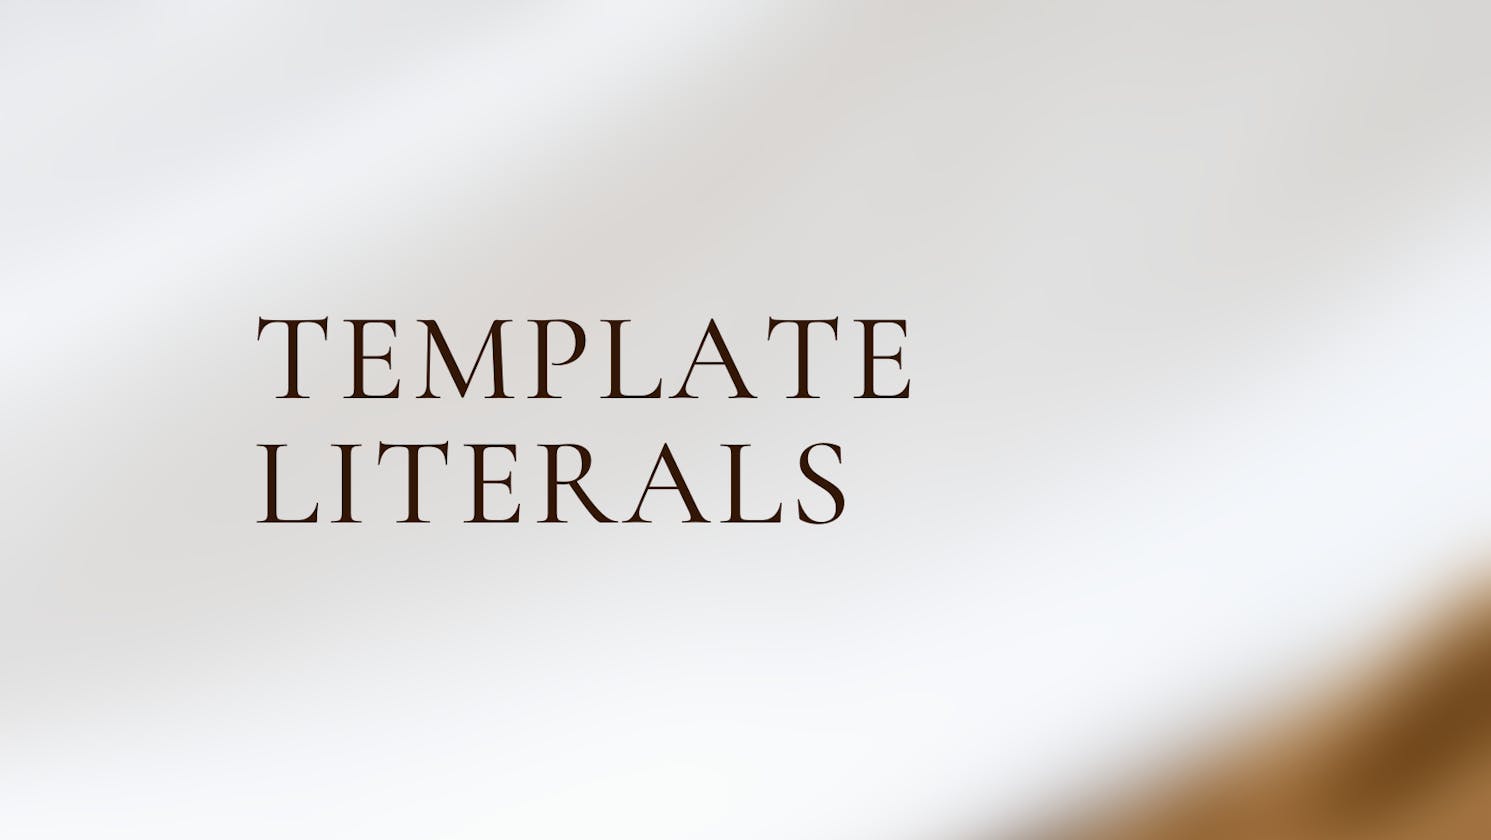 TEMPLATE LITERALS - Make Your Coding Experience Better.